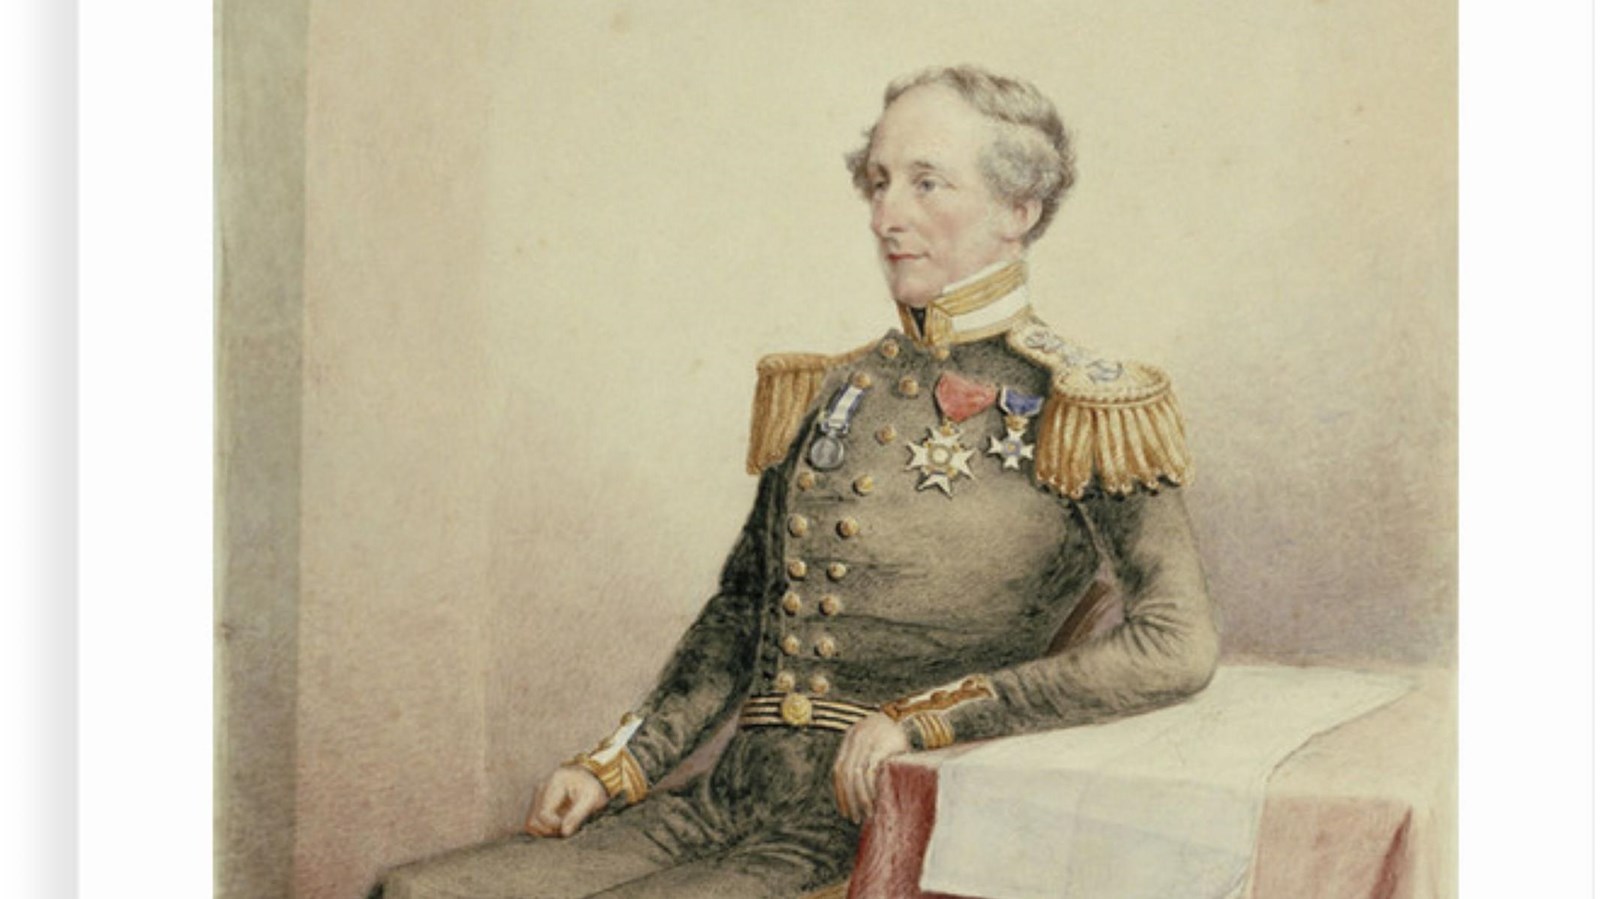 color drawing of a distinguished looking man in a naval uniform with large epaulettes